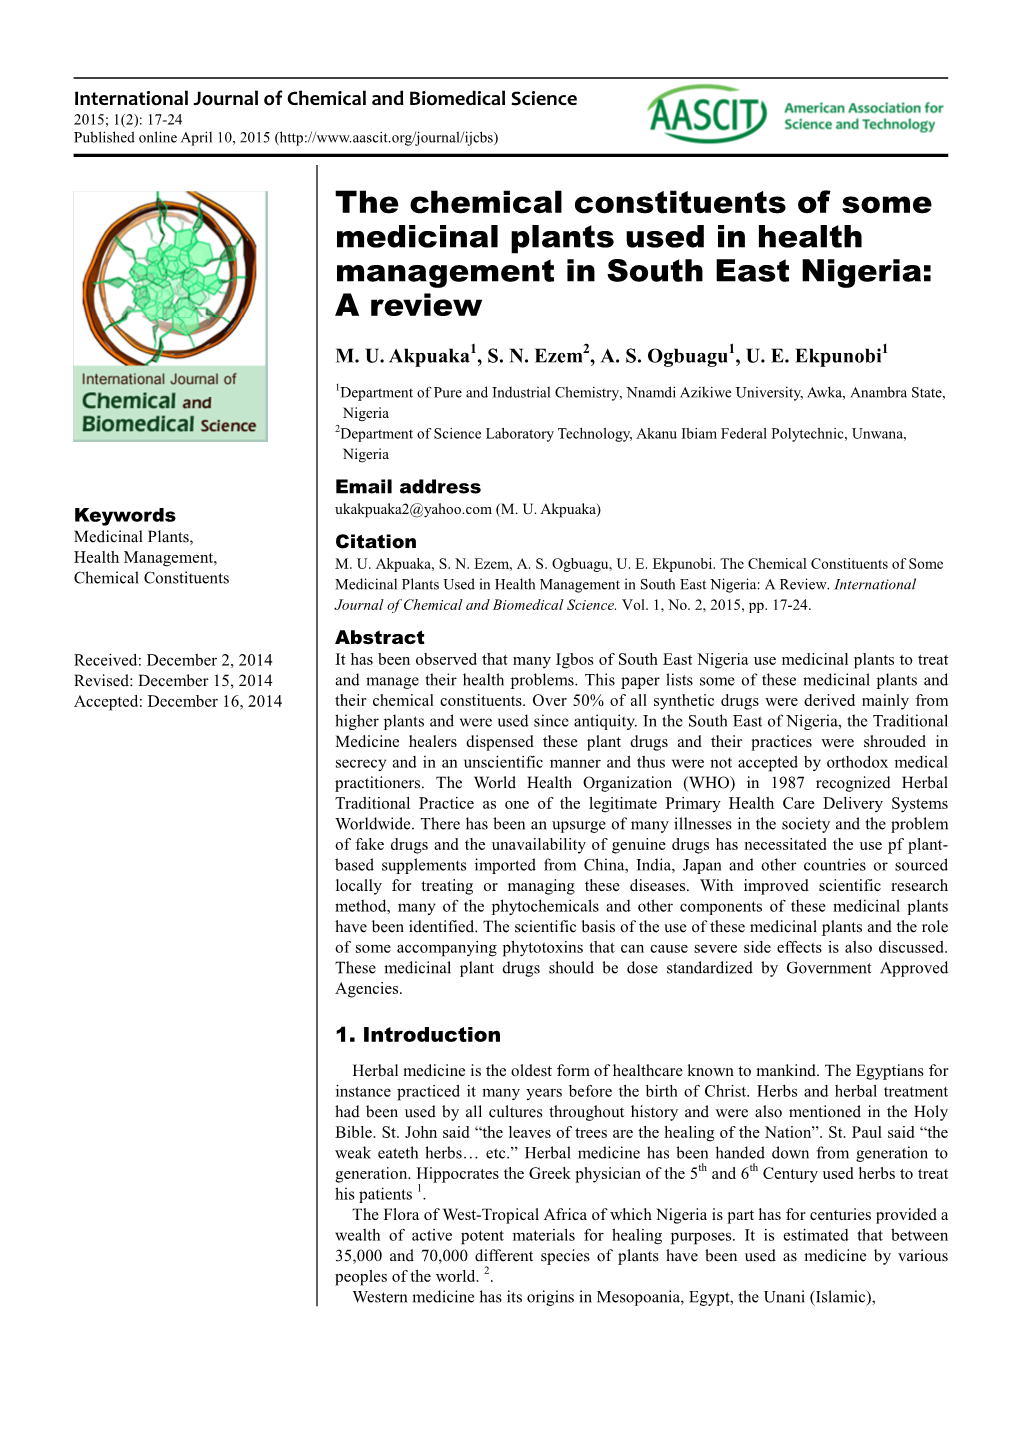 The Chemical Constituents of Some Medicinal Plants Used in Health Management in South East Nigeria: a Review